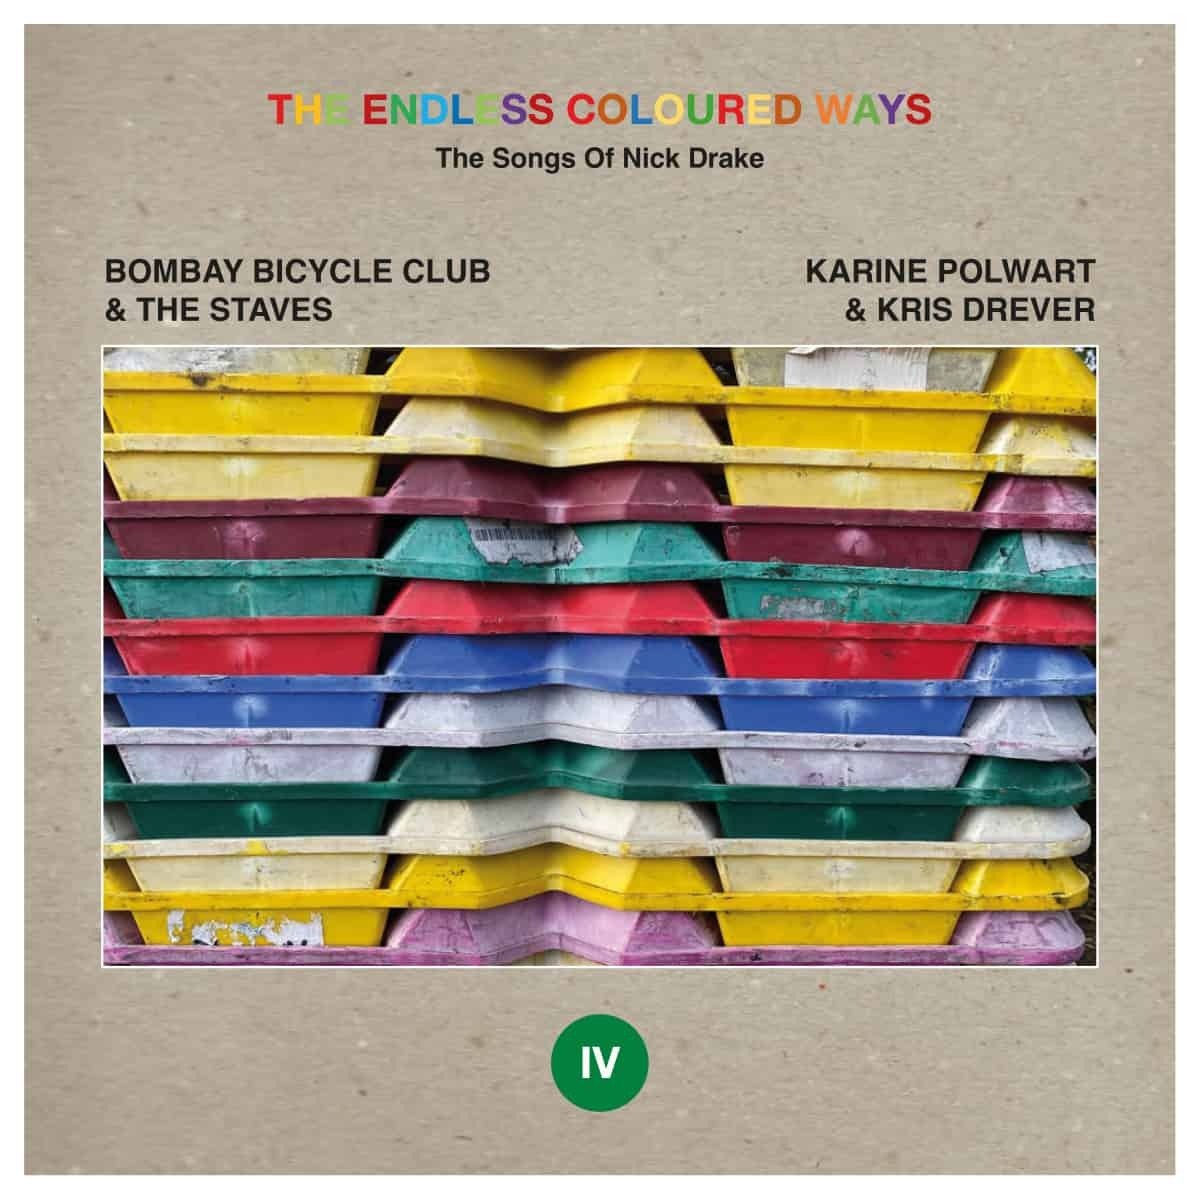 CD Shop - BOMBAY BICYCLE CLUB & THE STAVES THE E